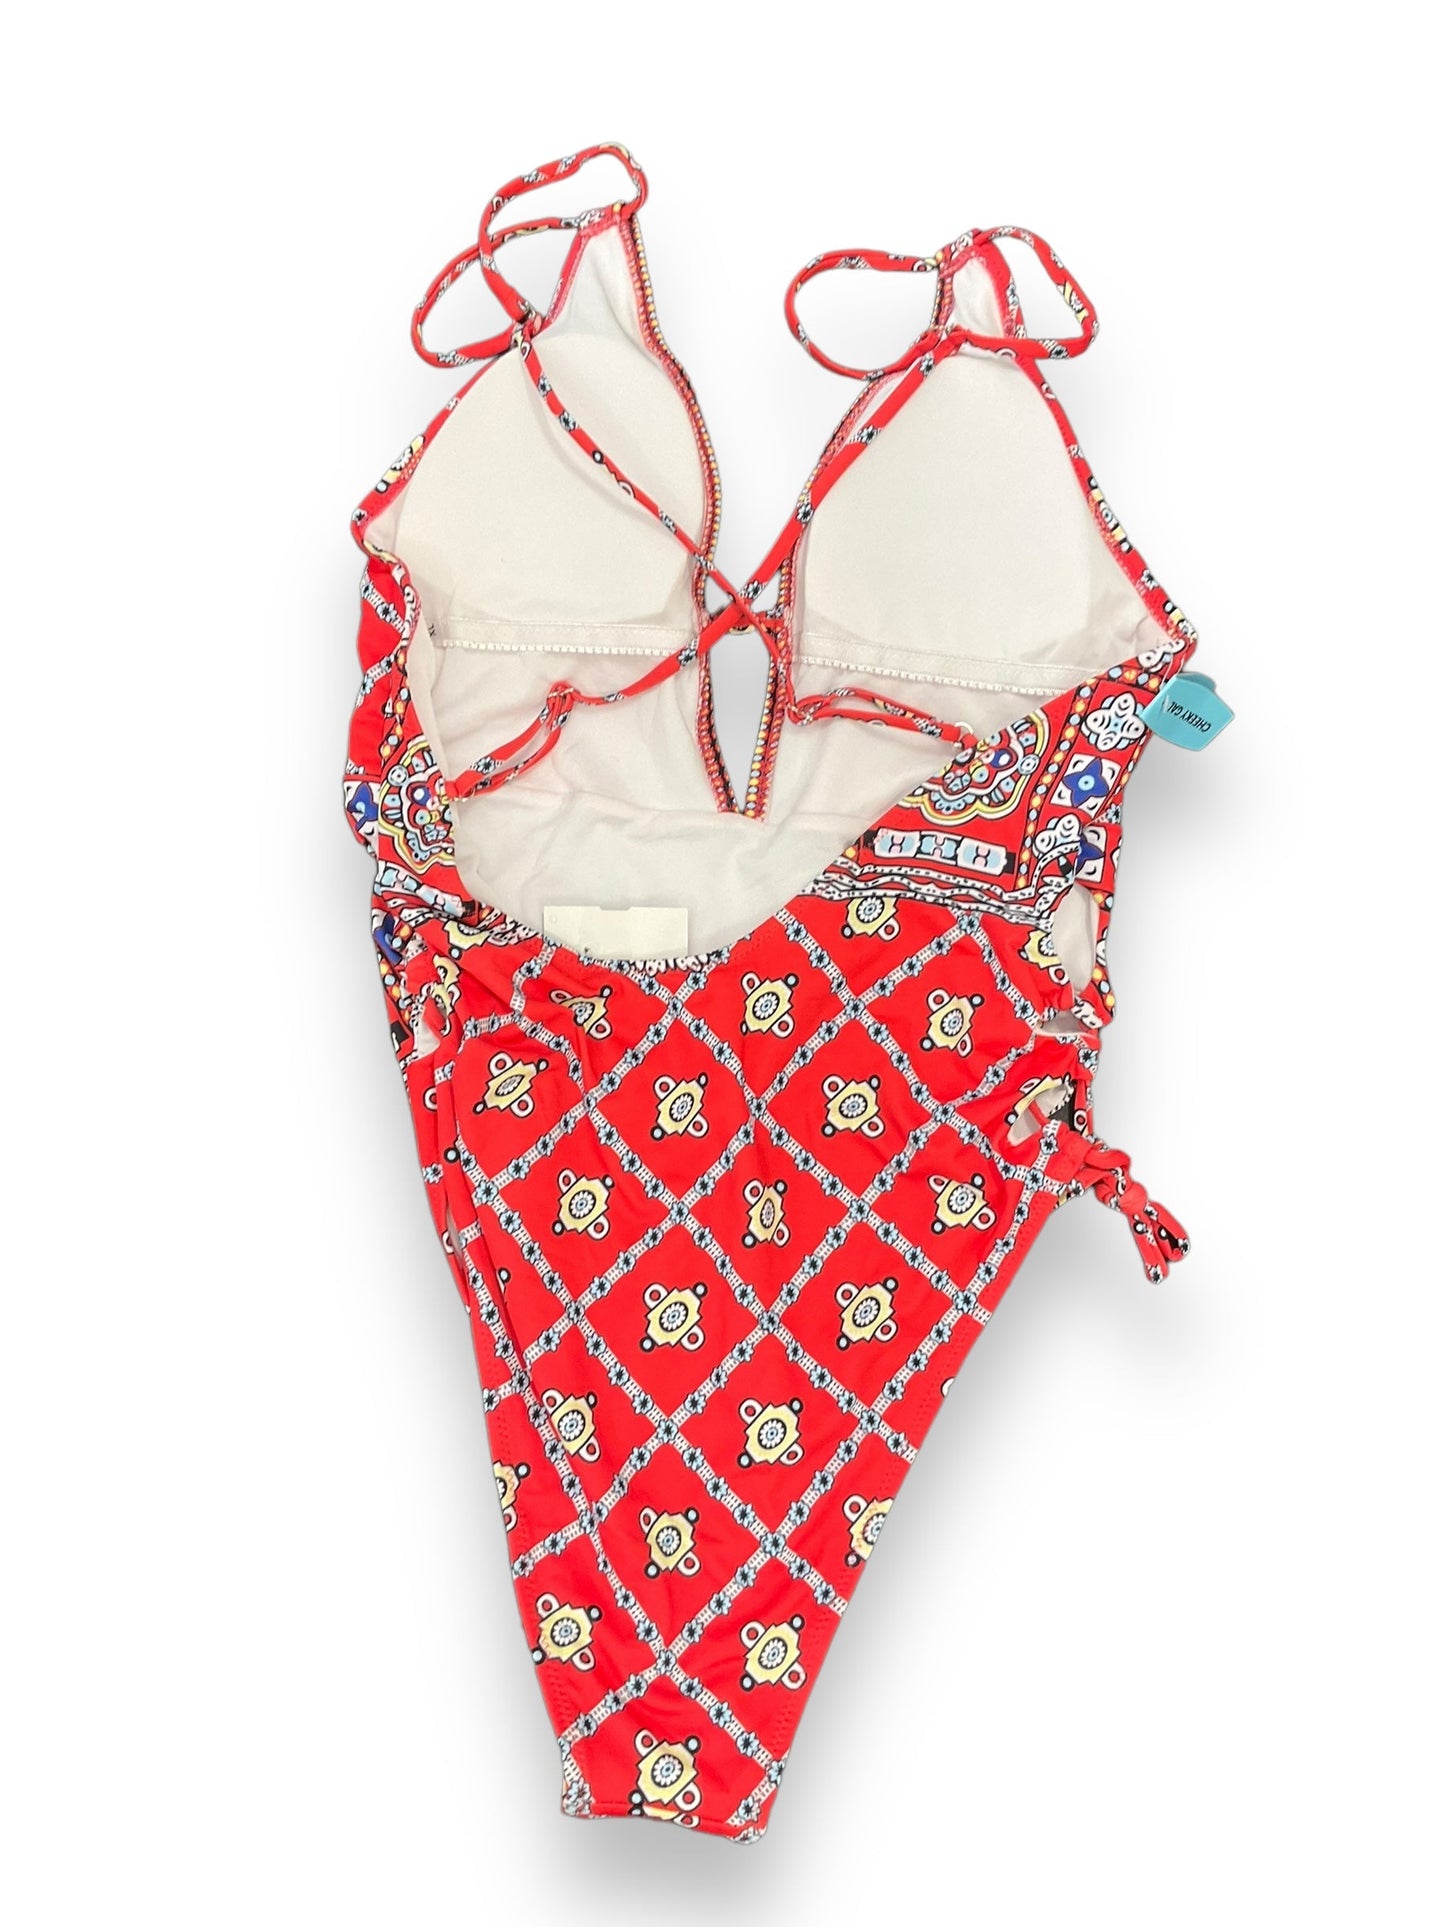 Multi-colored Swimsuit Cupshe, Size Xl